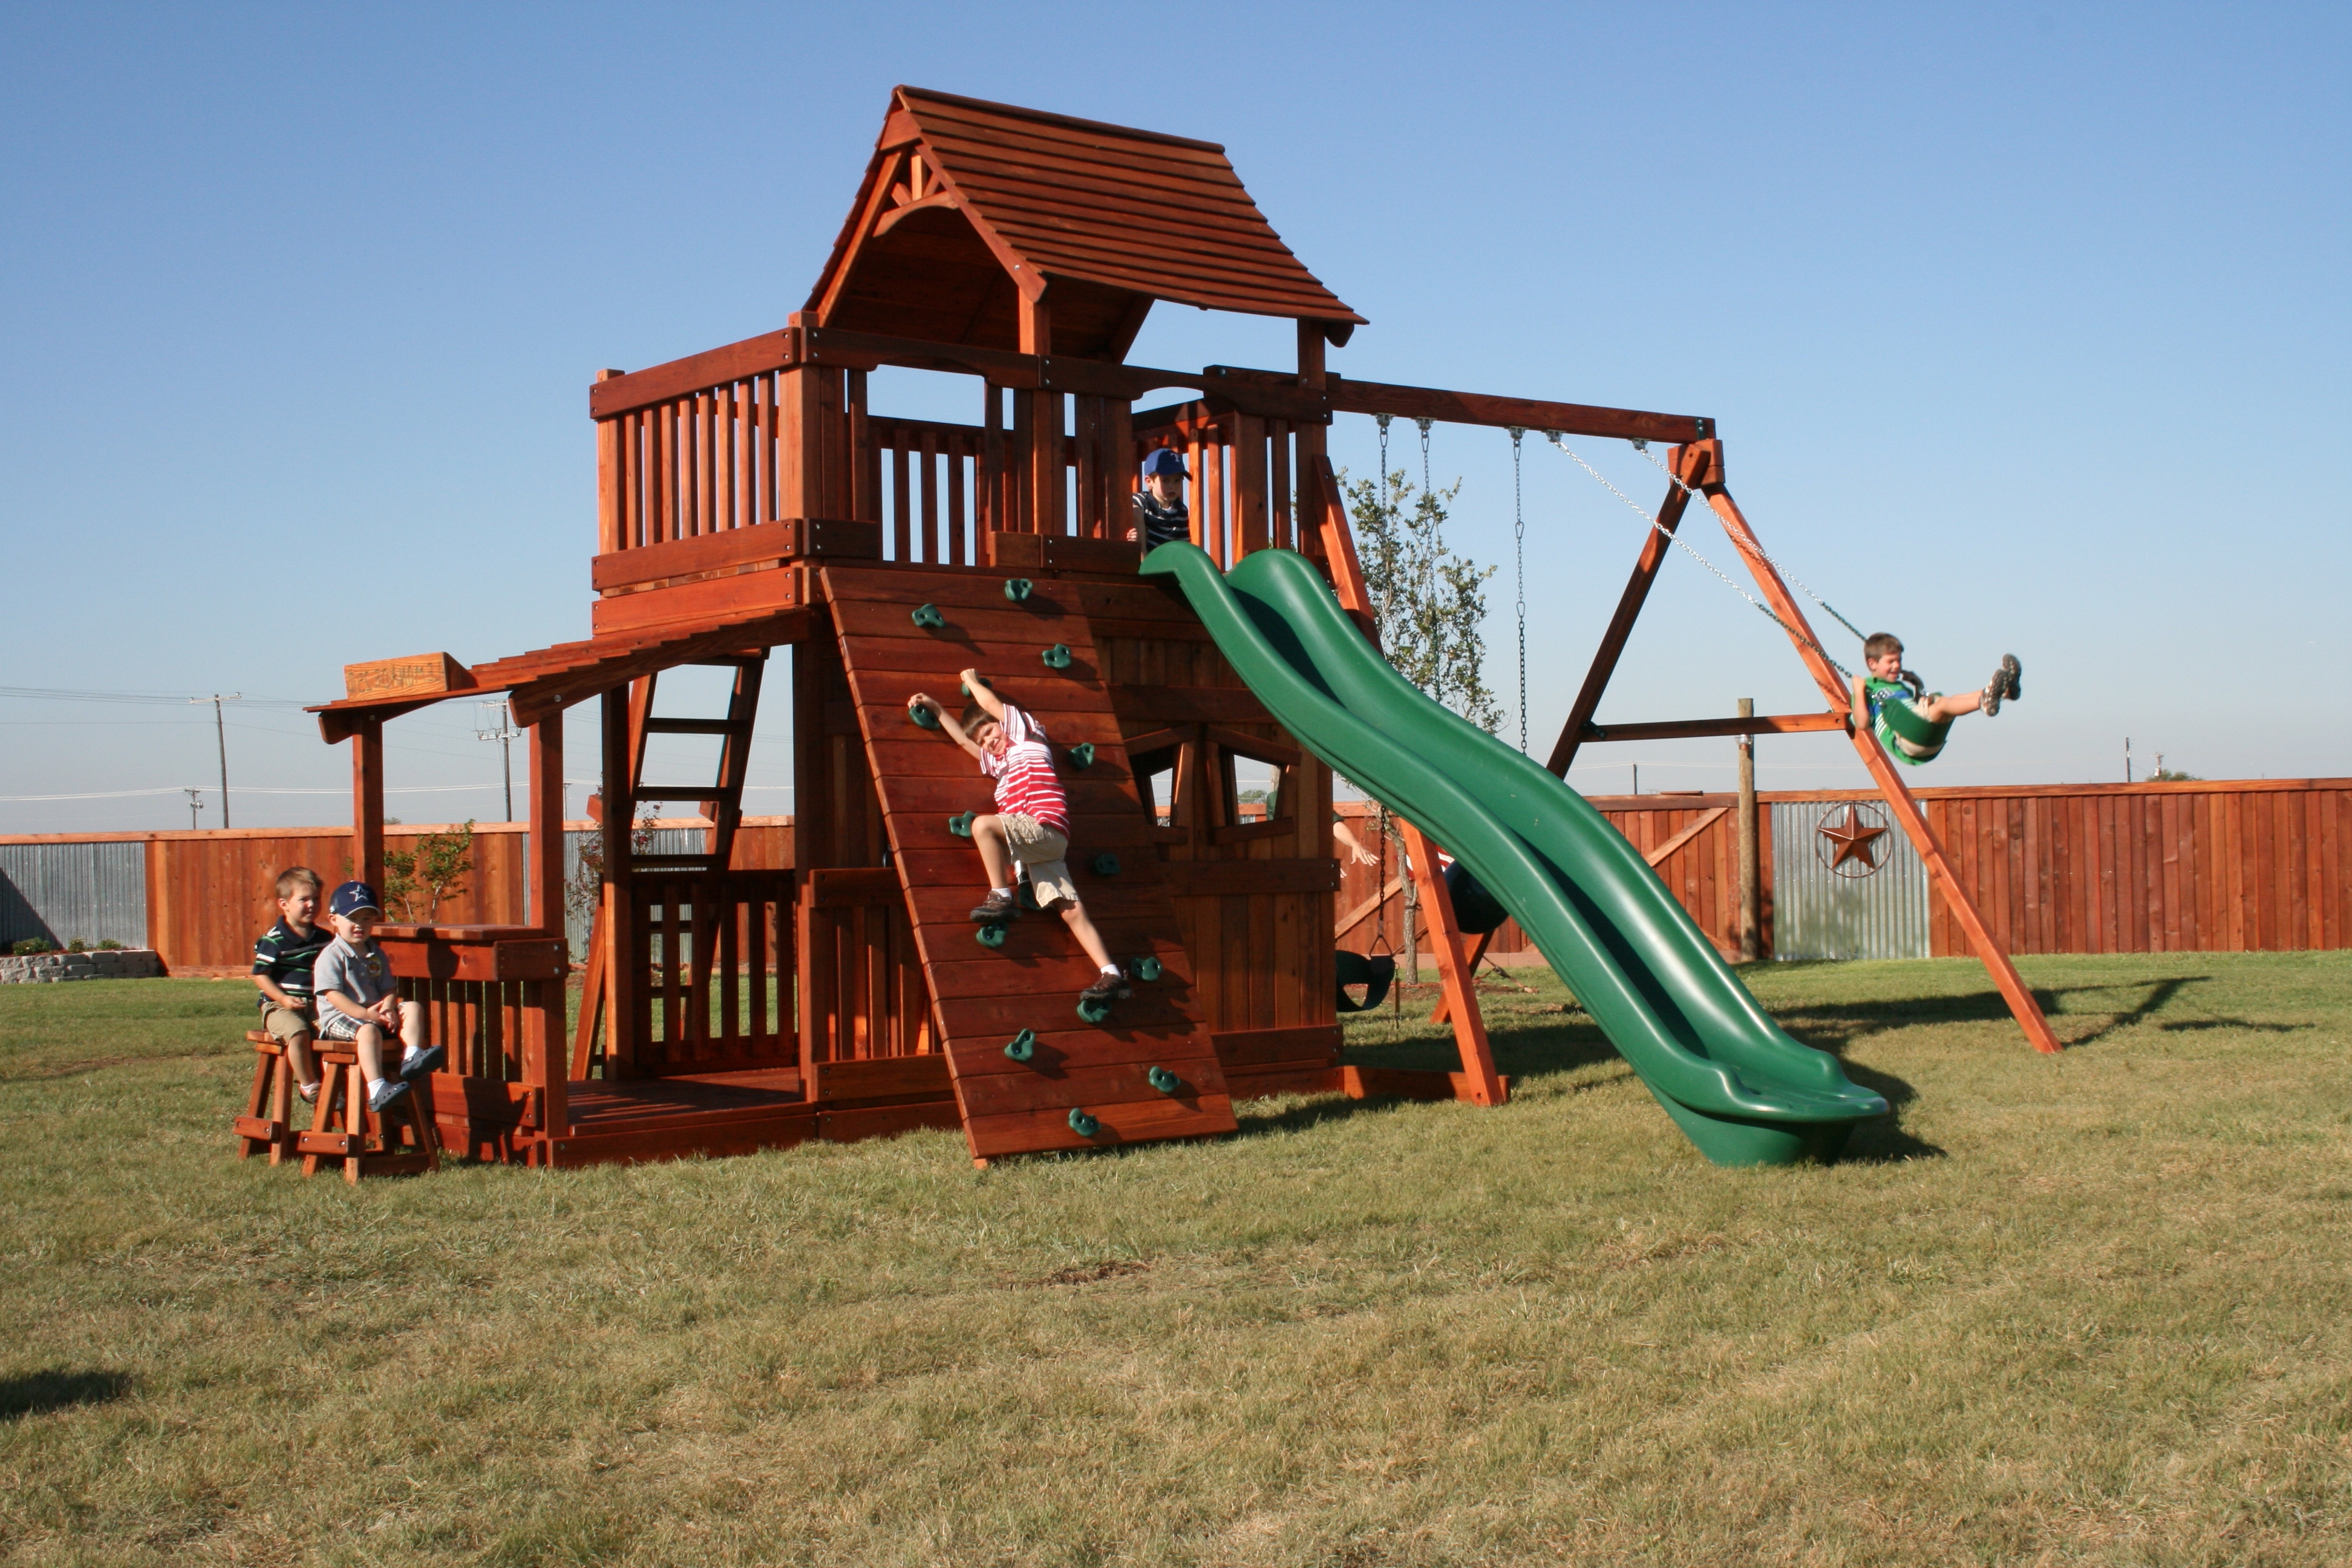 pictures-6-of-9-backyard-slides-for-kids-wooden-best-outdoor-playground-designs-playsets_best-back-yard_home-decor_home-decor-catalogs-rustic-target-yosemite-discount-decorators-collecti